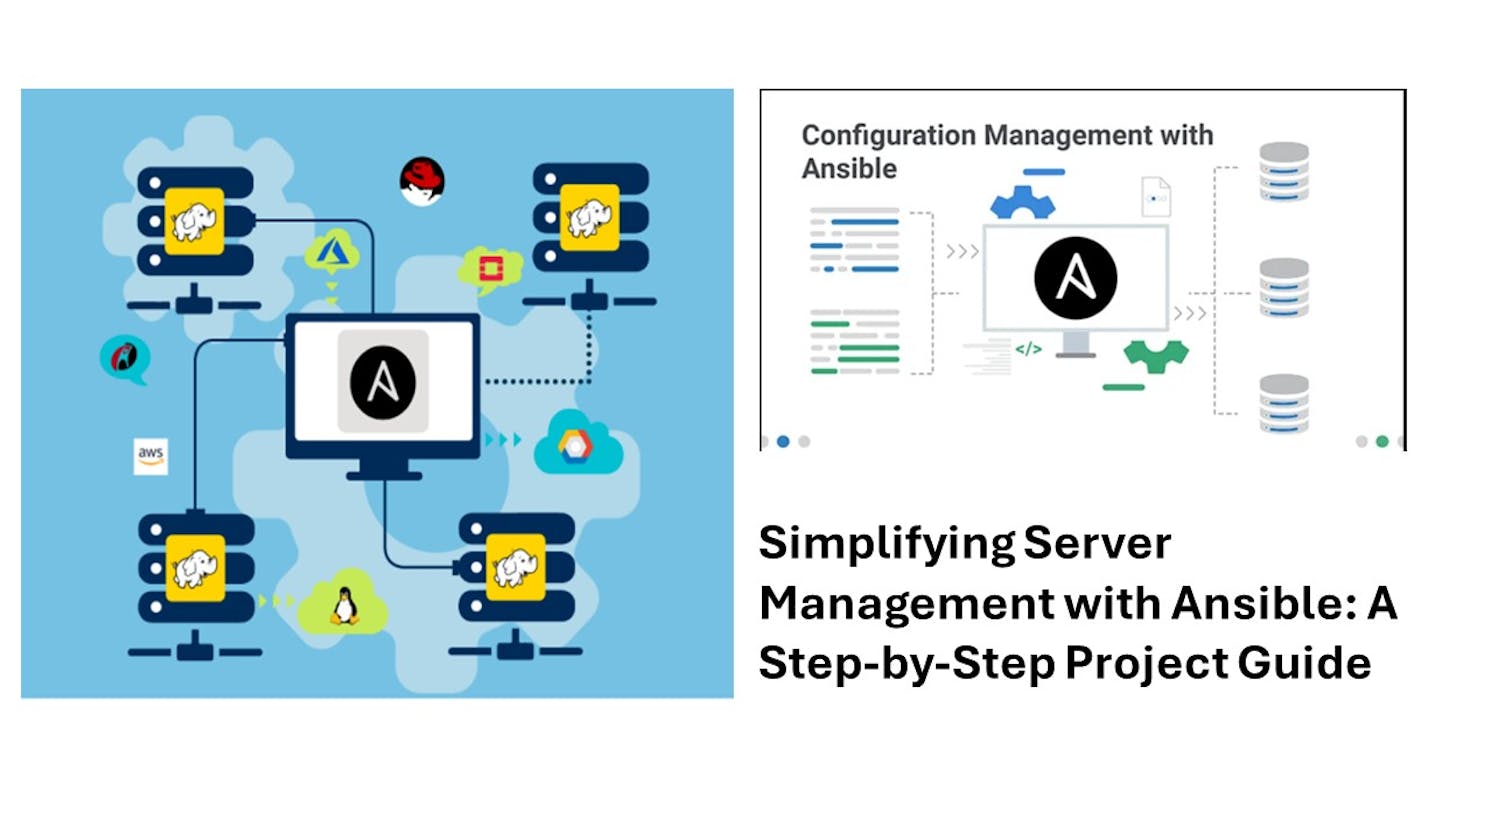 Simplifying Server Management with Ansible: A Step-by-Step Project Guide